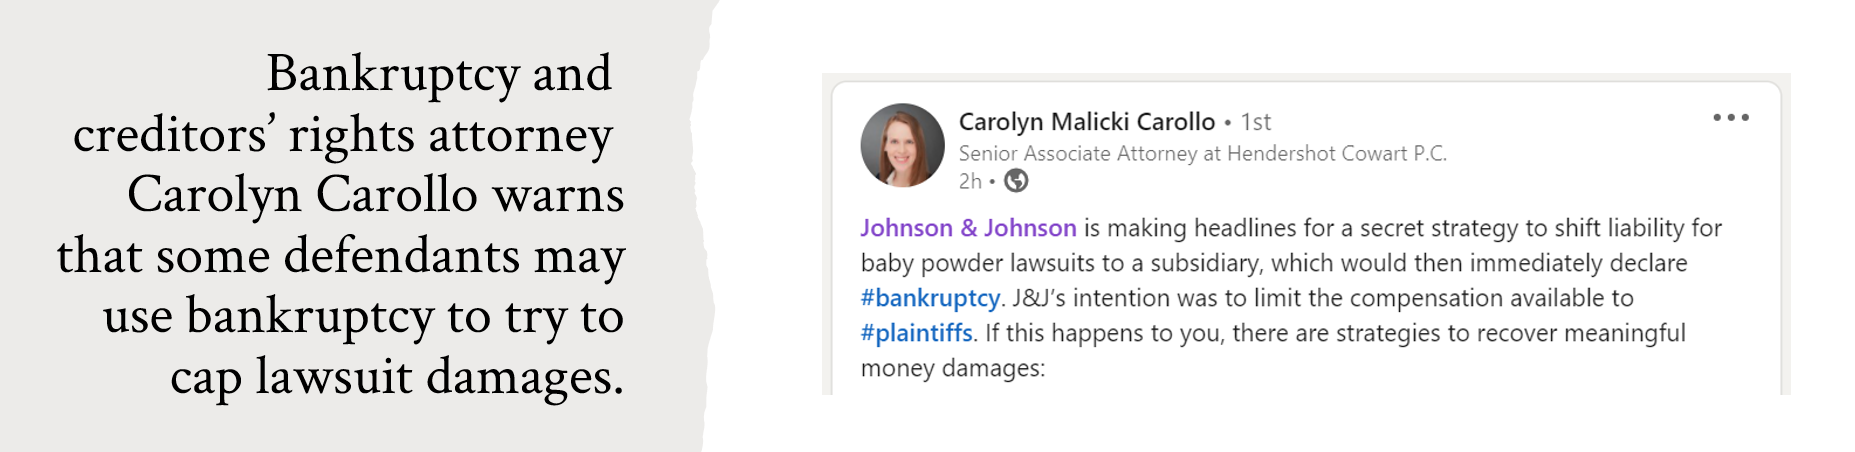 Screenshot of a LinkedIn post by creditors' rights attorney Carolyn Carollo. She writes, "Johnson & Johnson is making headlines for a secret strategy to shift liability for baby powder lawsuits to a subsidiary, which would then immediately declare #bankruptcy. J&J’s intention was to limit the compensation available to #plaintiffs. If this happens to you, there are strategies to recover meaningful money damages."